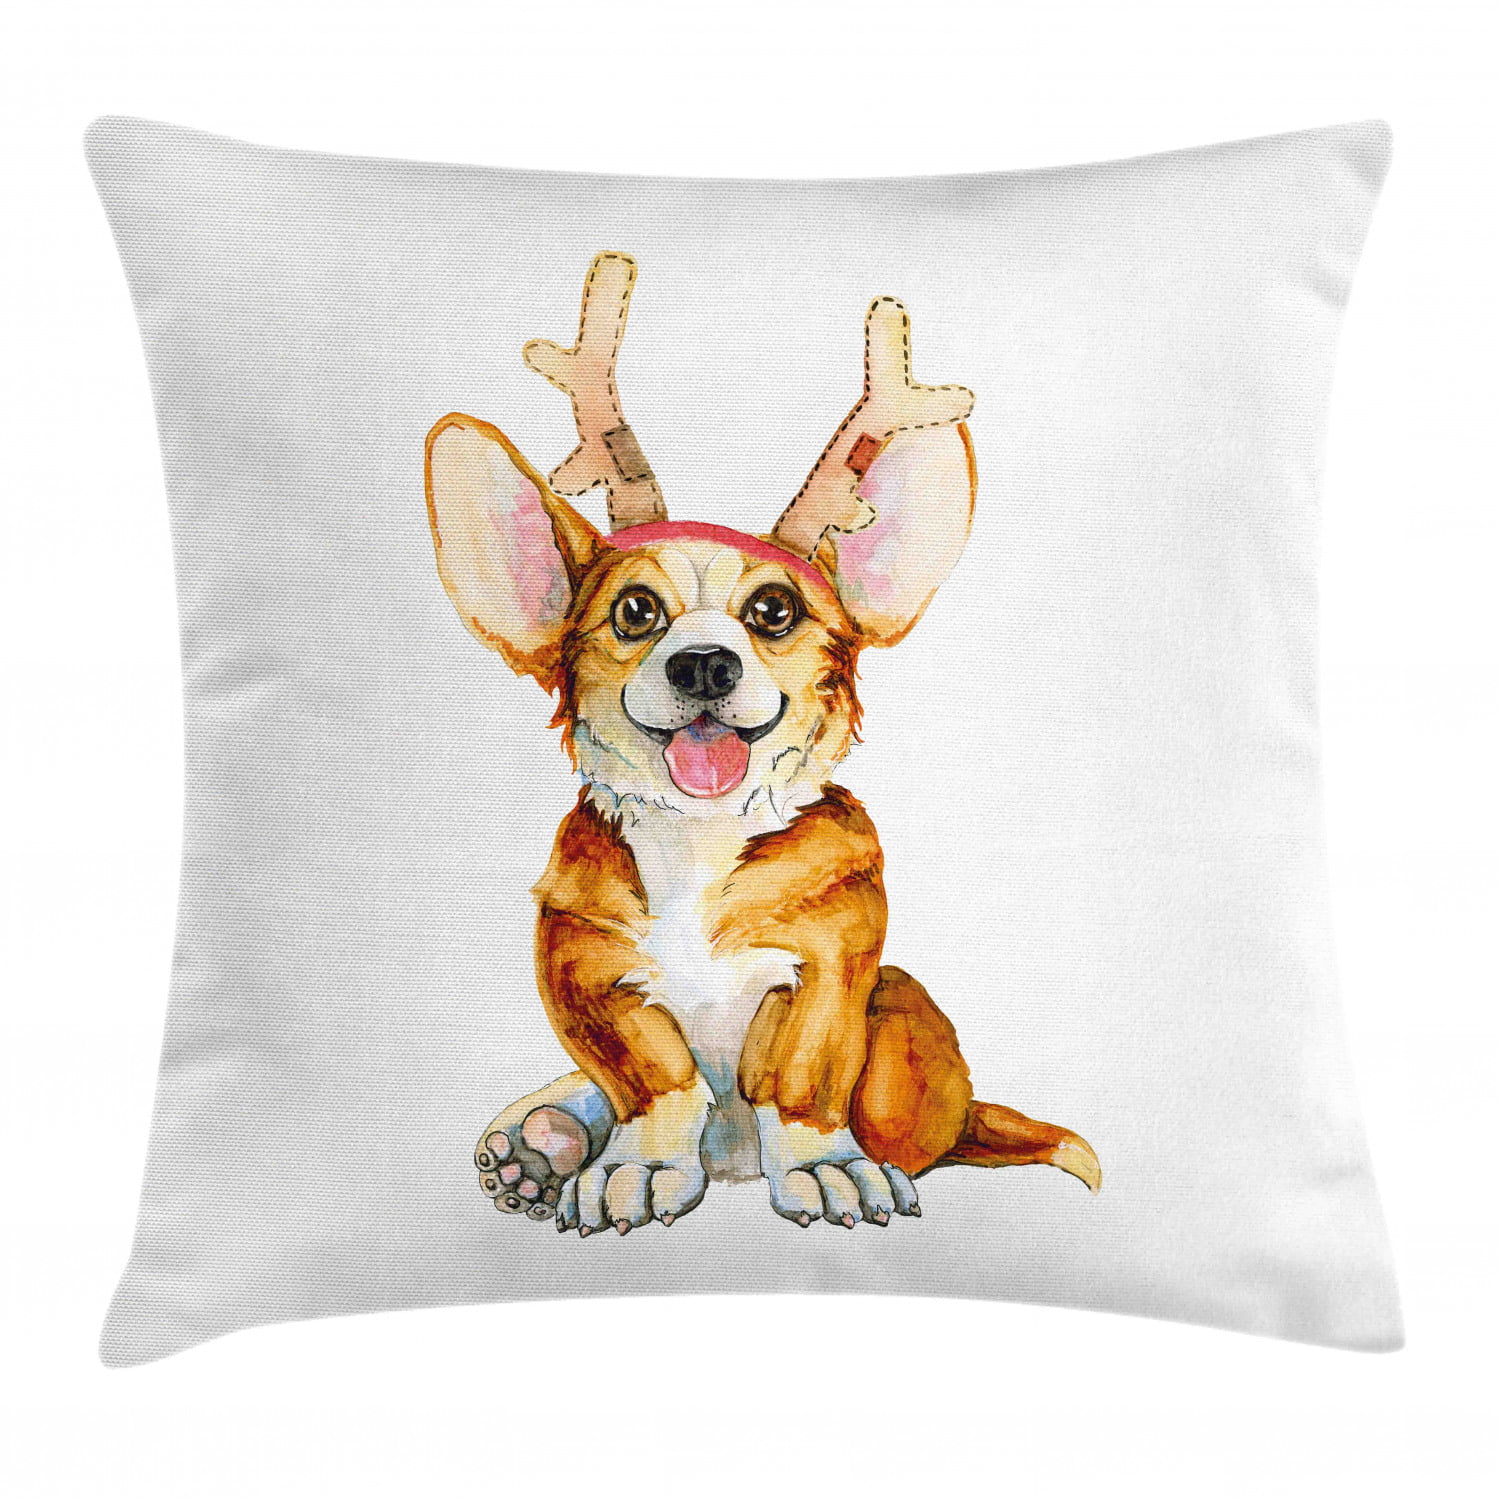 Dog Lover Gifts Chihuahua Dog Decor Funny Chihuahua Pillow Cover,18 x 18 Inch Color Printing Linen Cushion Cover for Sofa Couch Bed It's Not Dog Hair It's Chihuahua Glitter Throw Pillow Case 